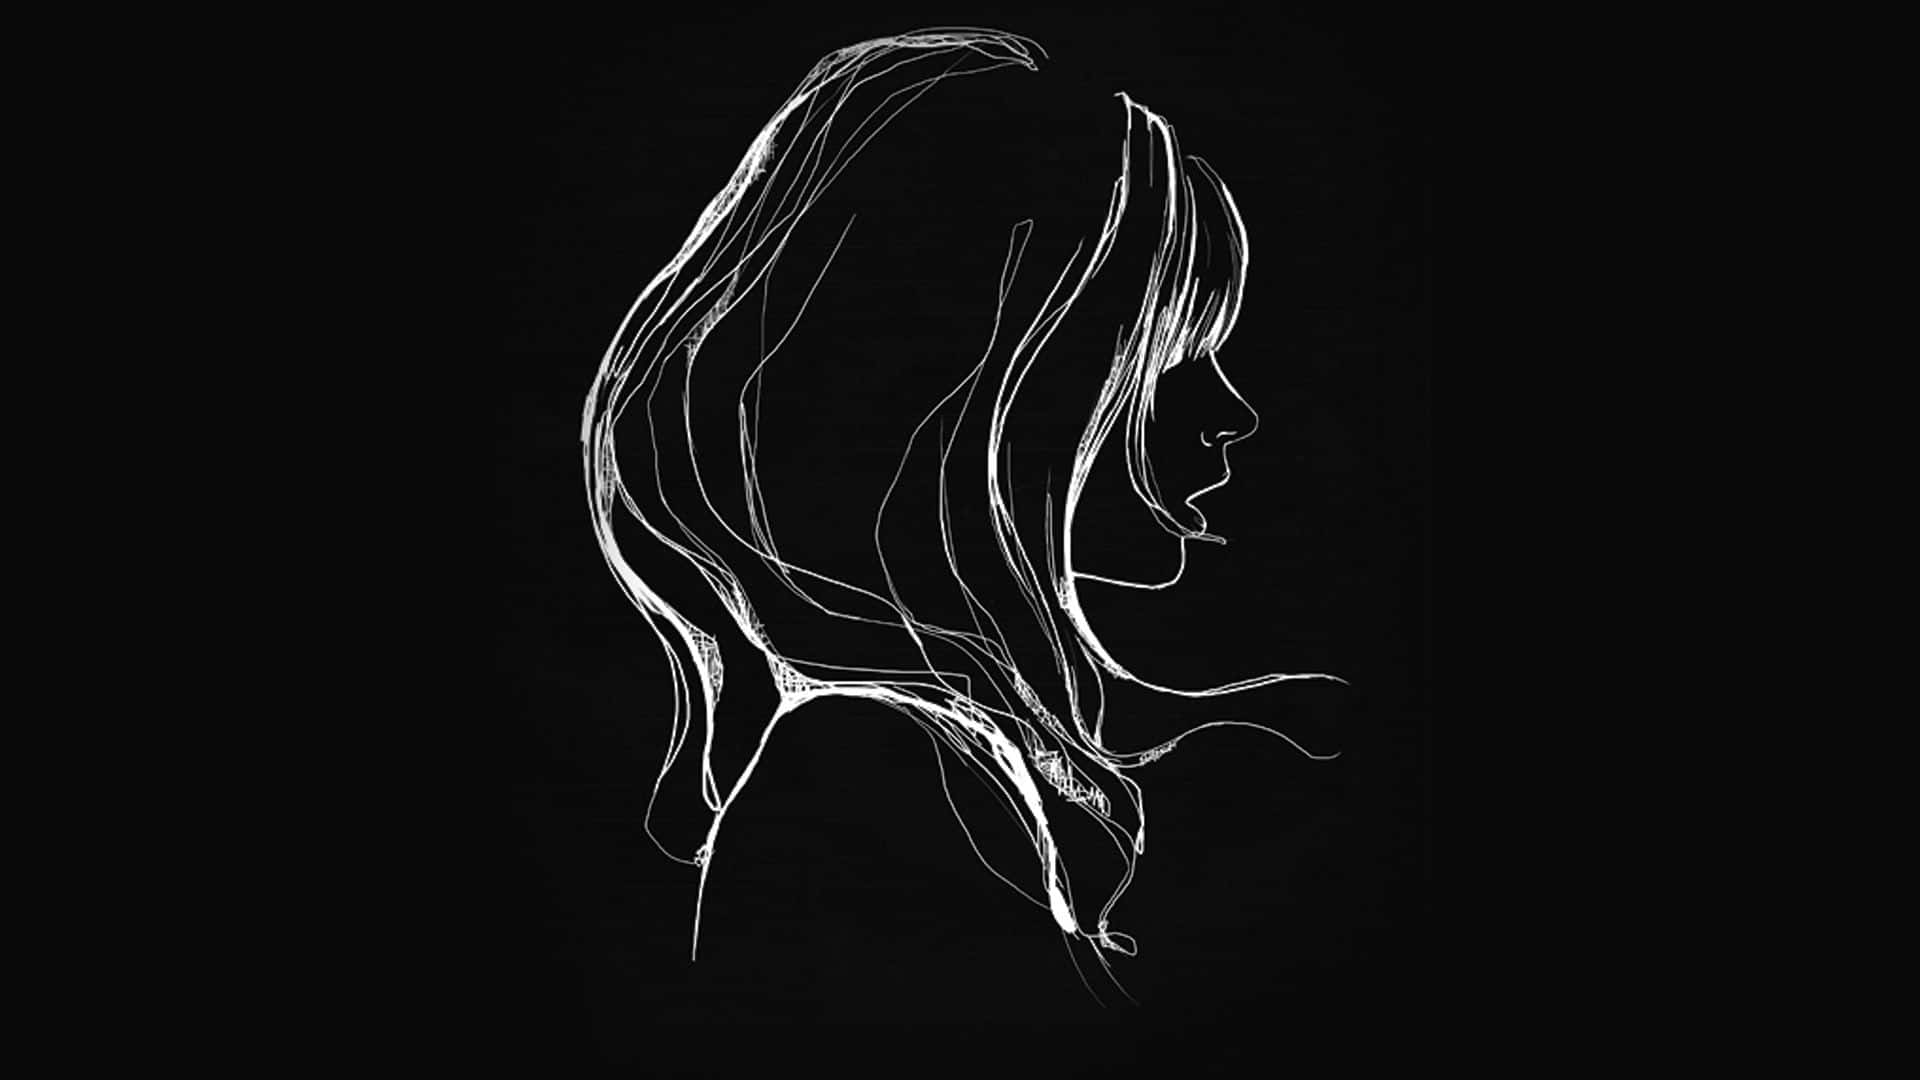 Draw your scribble hand drawn sketch on black background by Sketchdesignr |  Fiverr